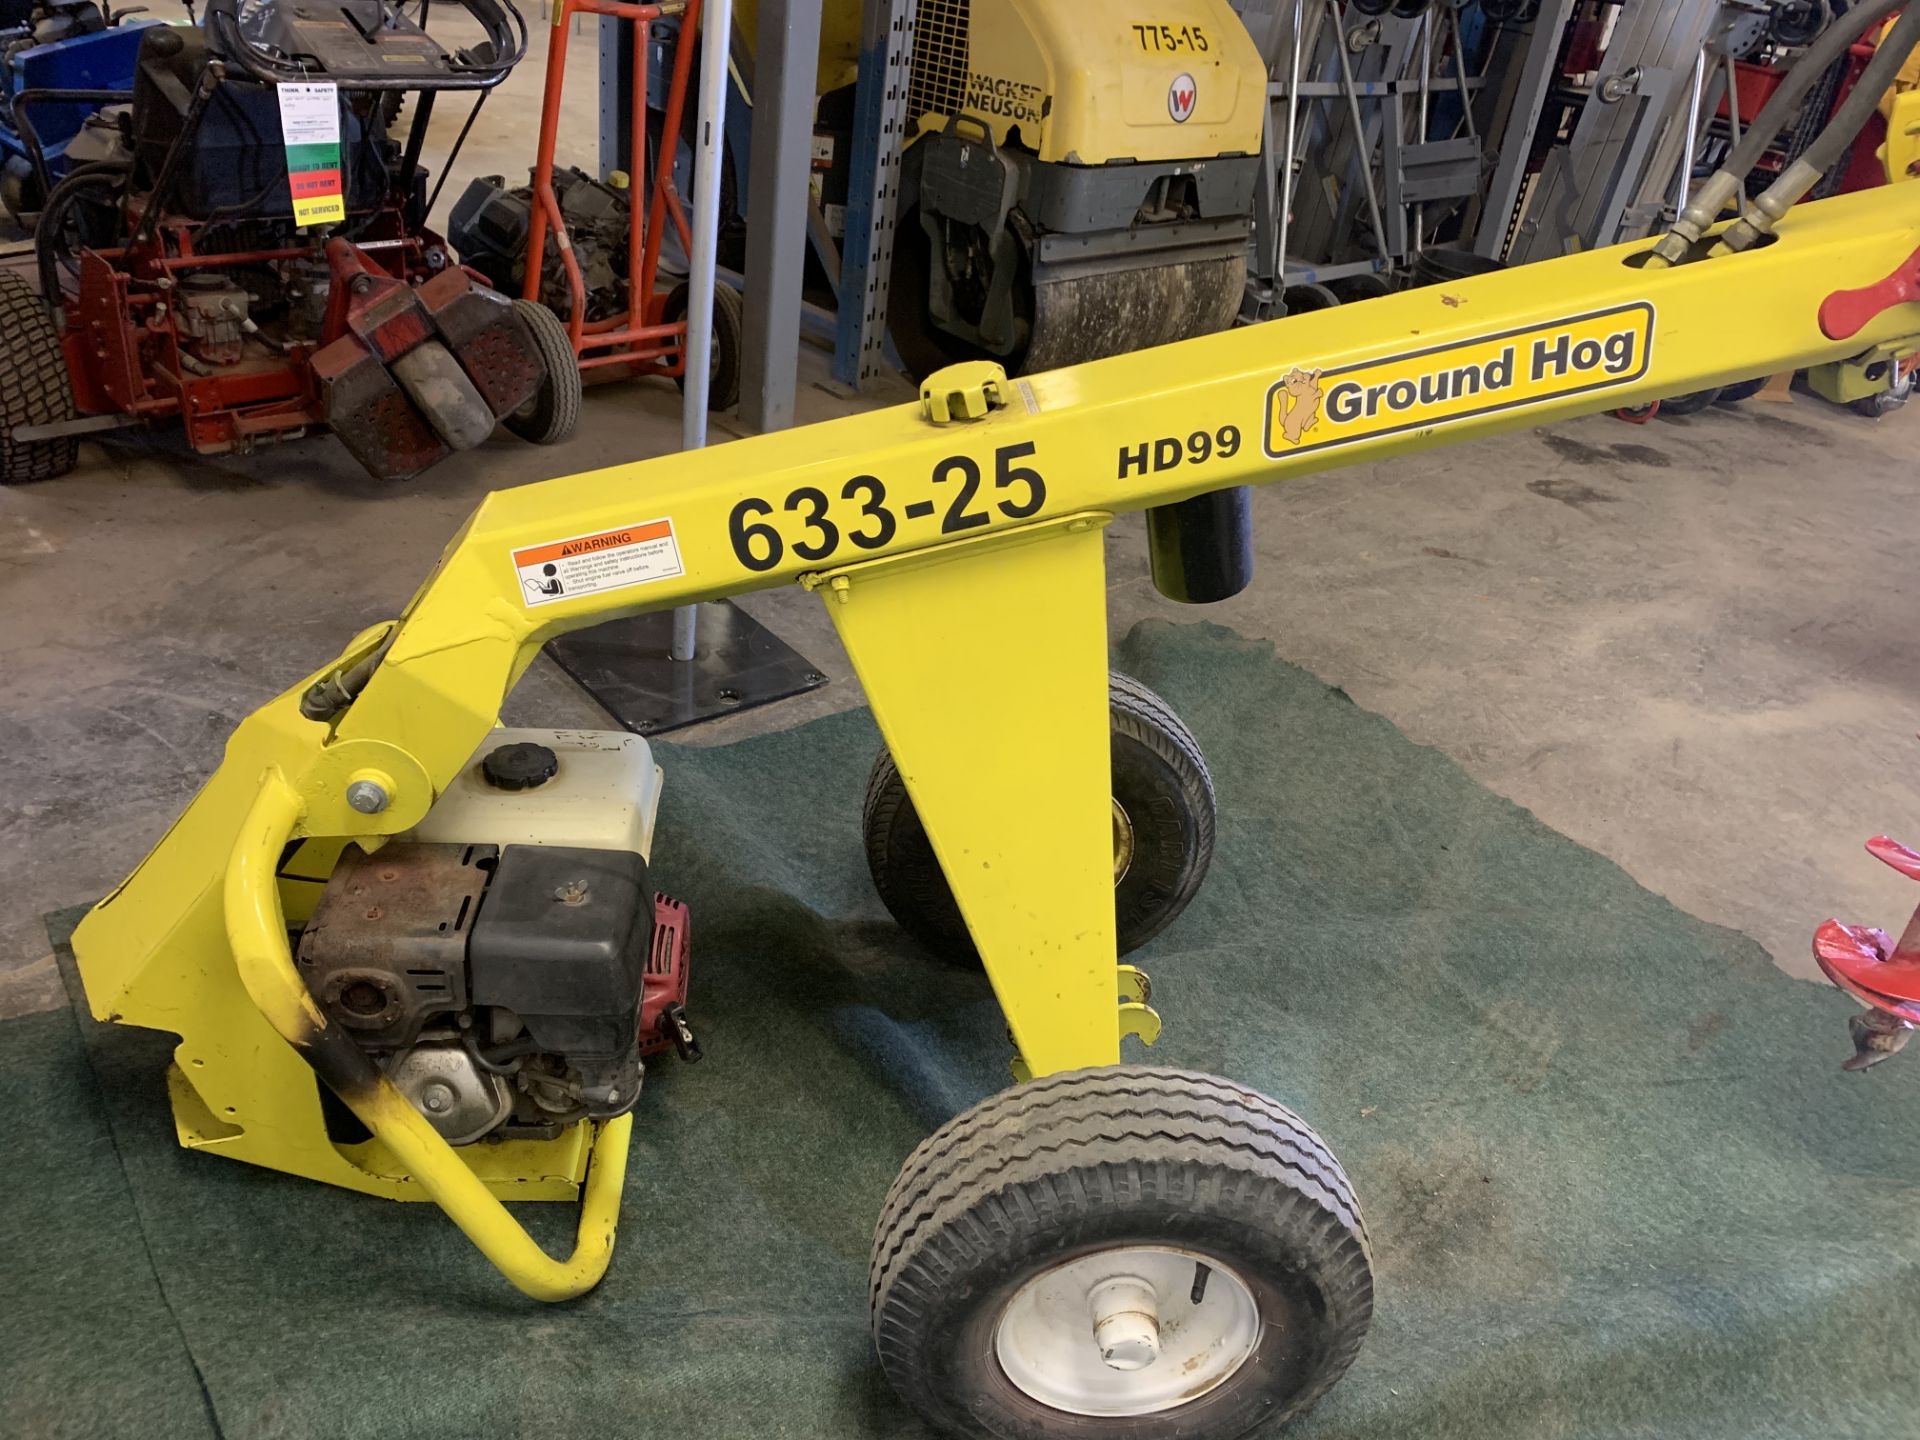 Ground Hog HD99 hydraulic post digger with auger, s/n 402107 - Image 2 of 2